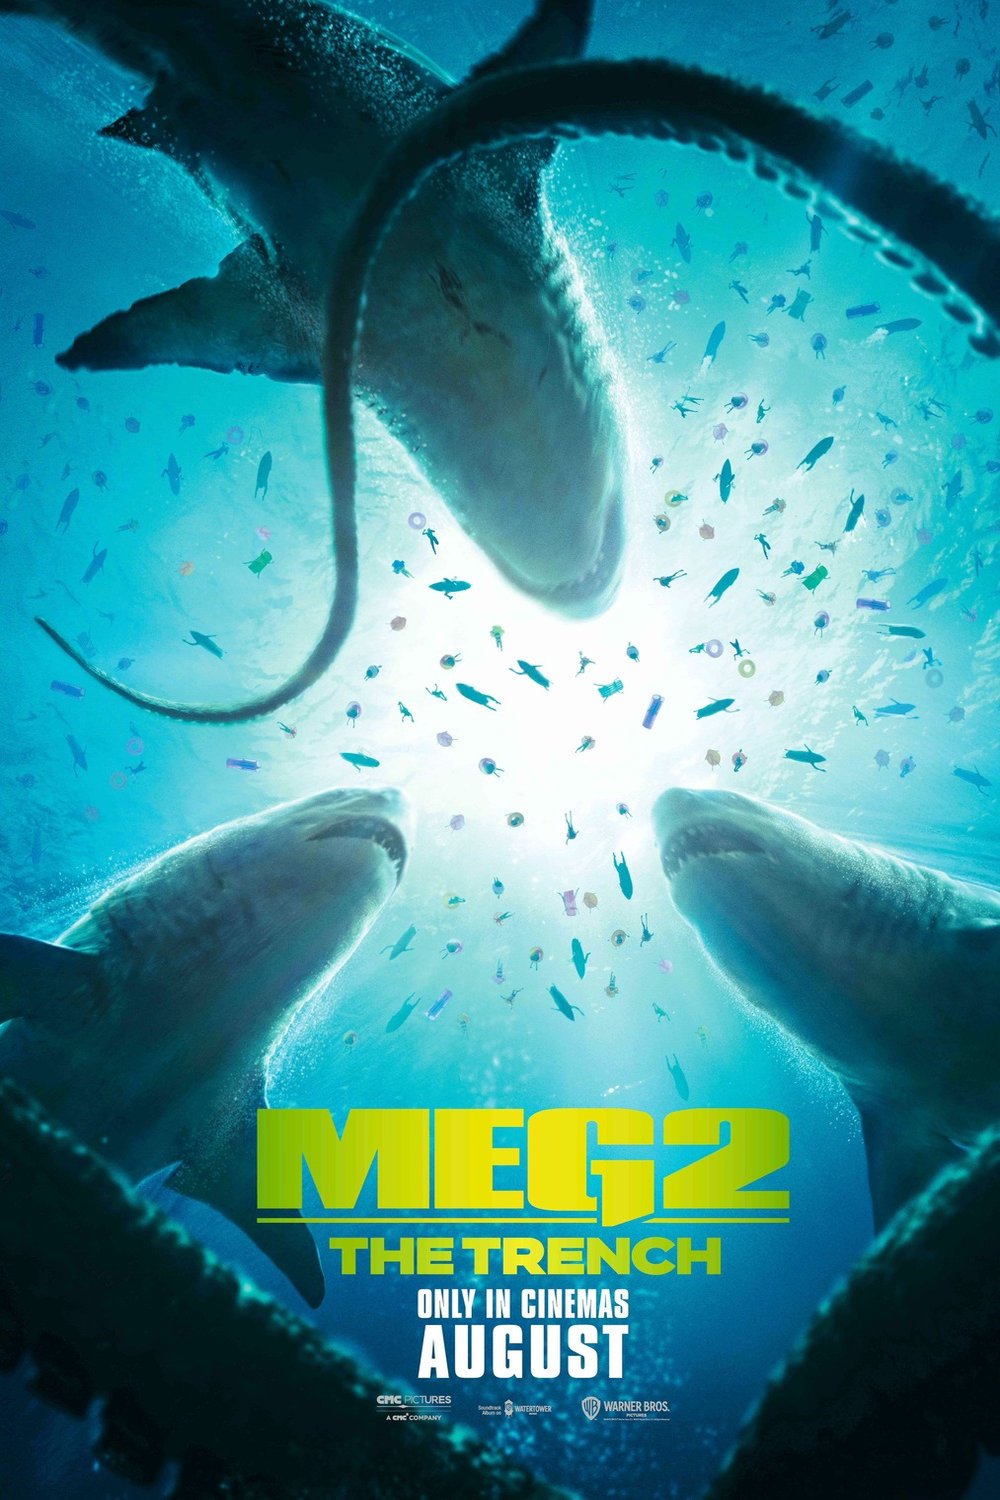 Poster of the movie Meg 2: The Trench